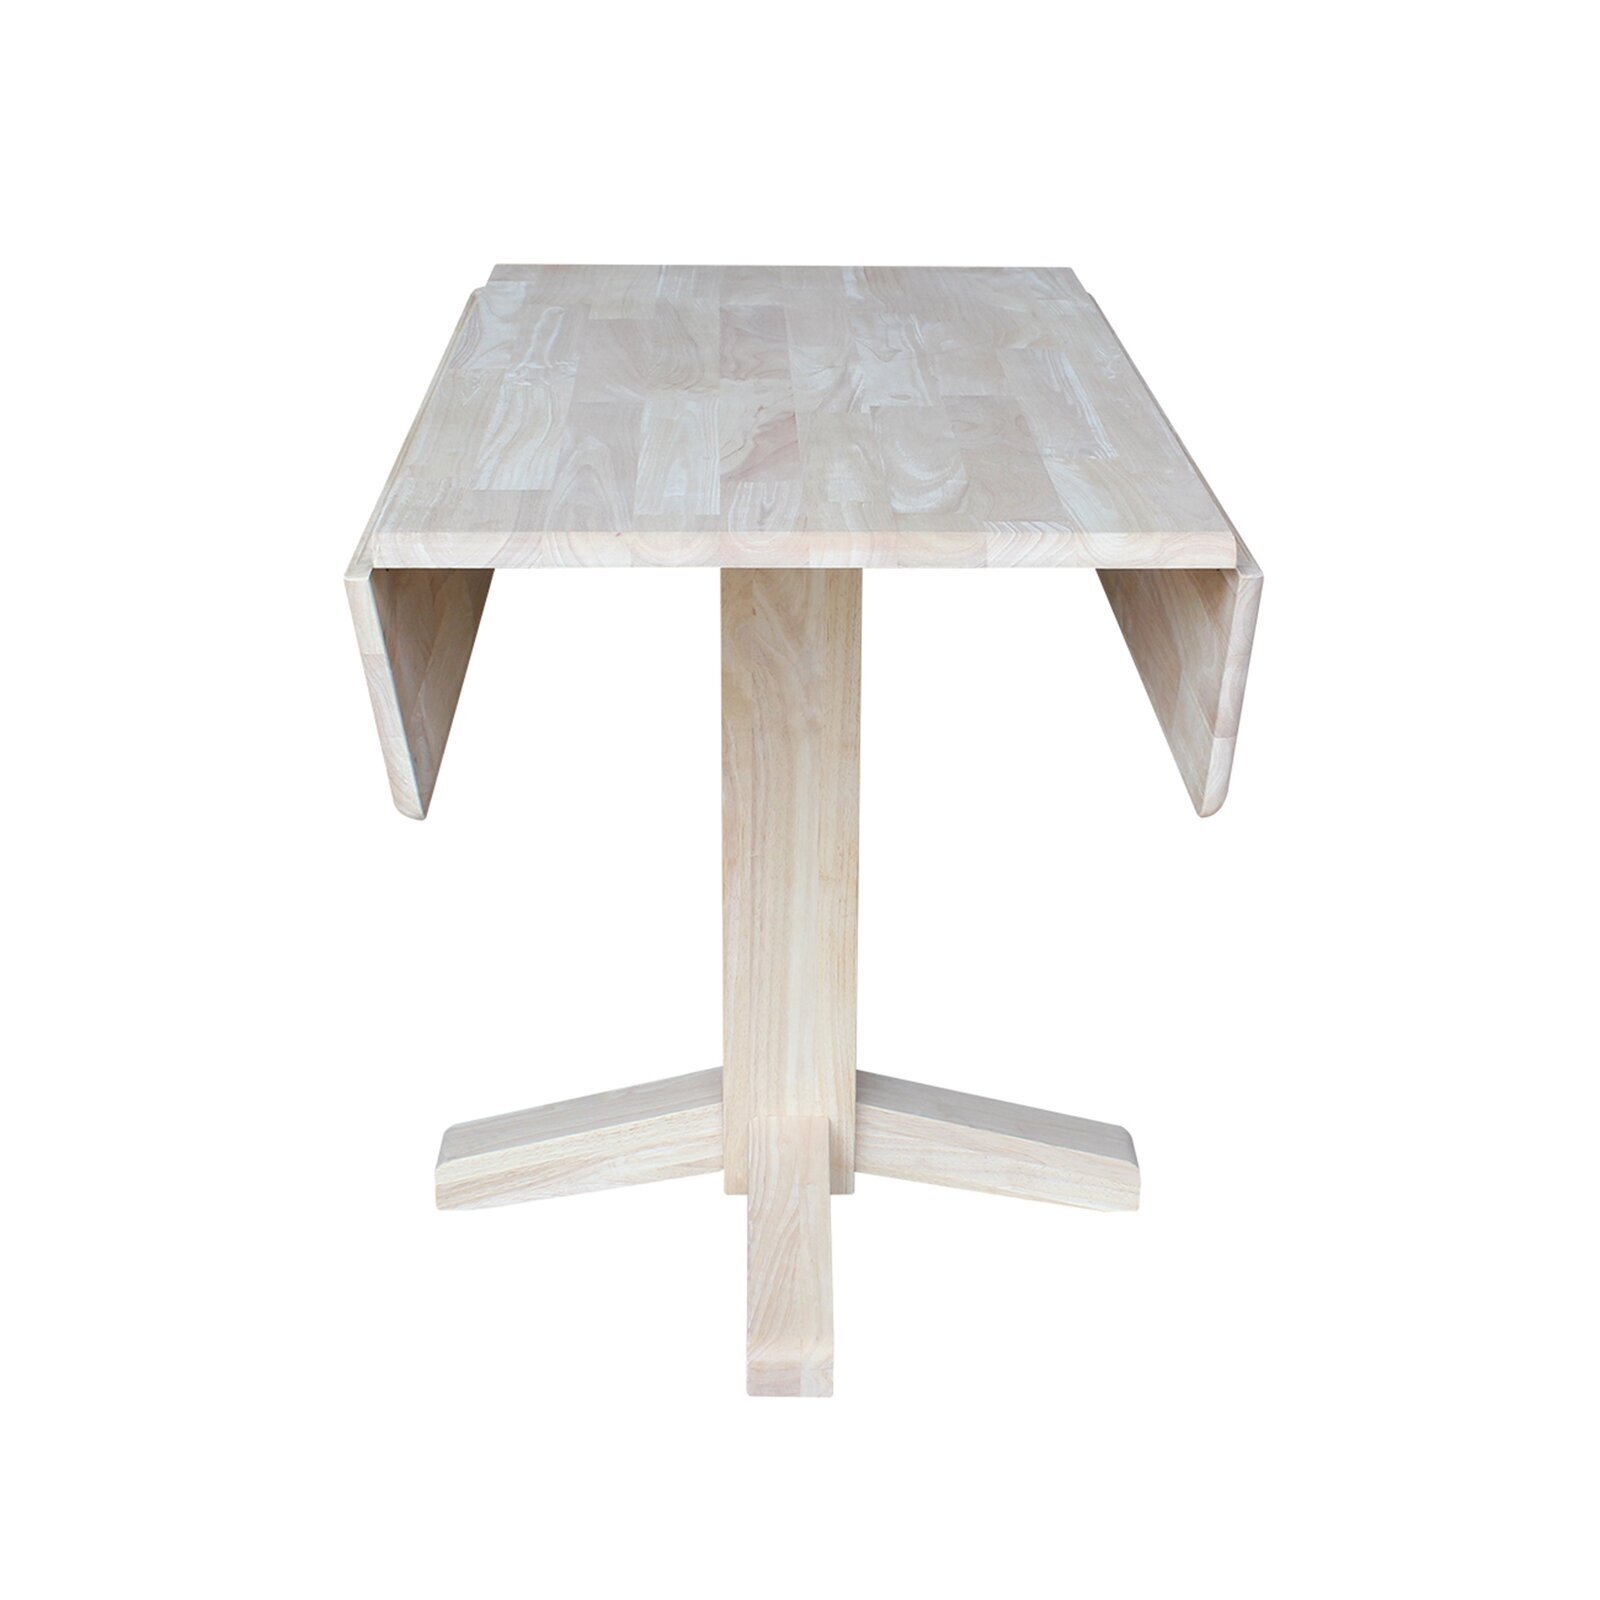 White Distressed Dining Table With Drop Leaves